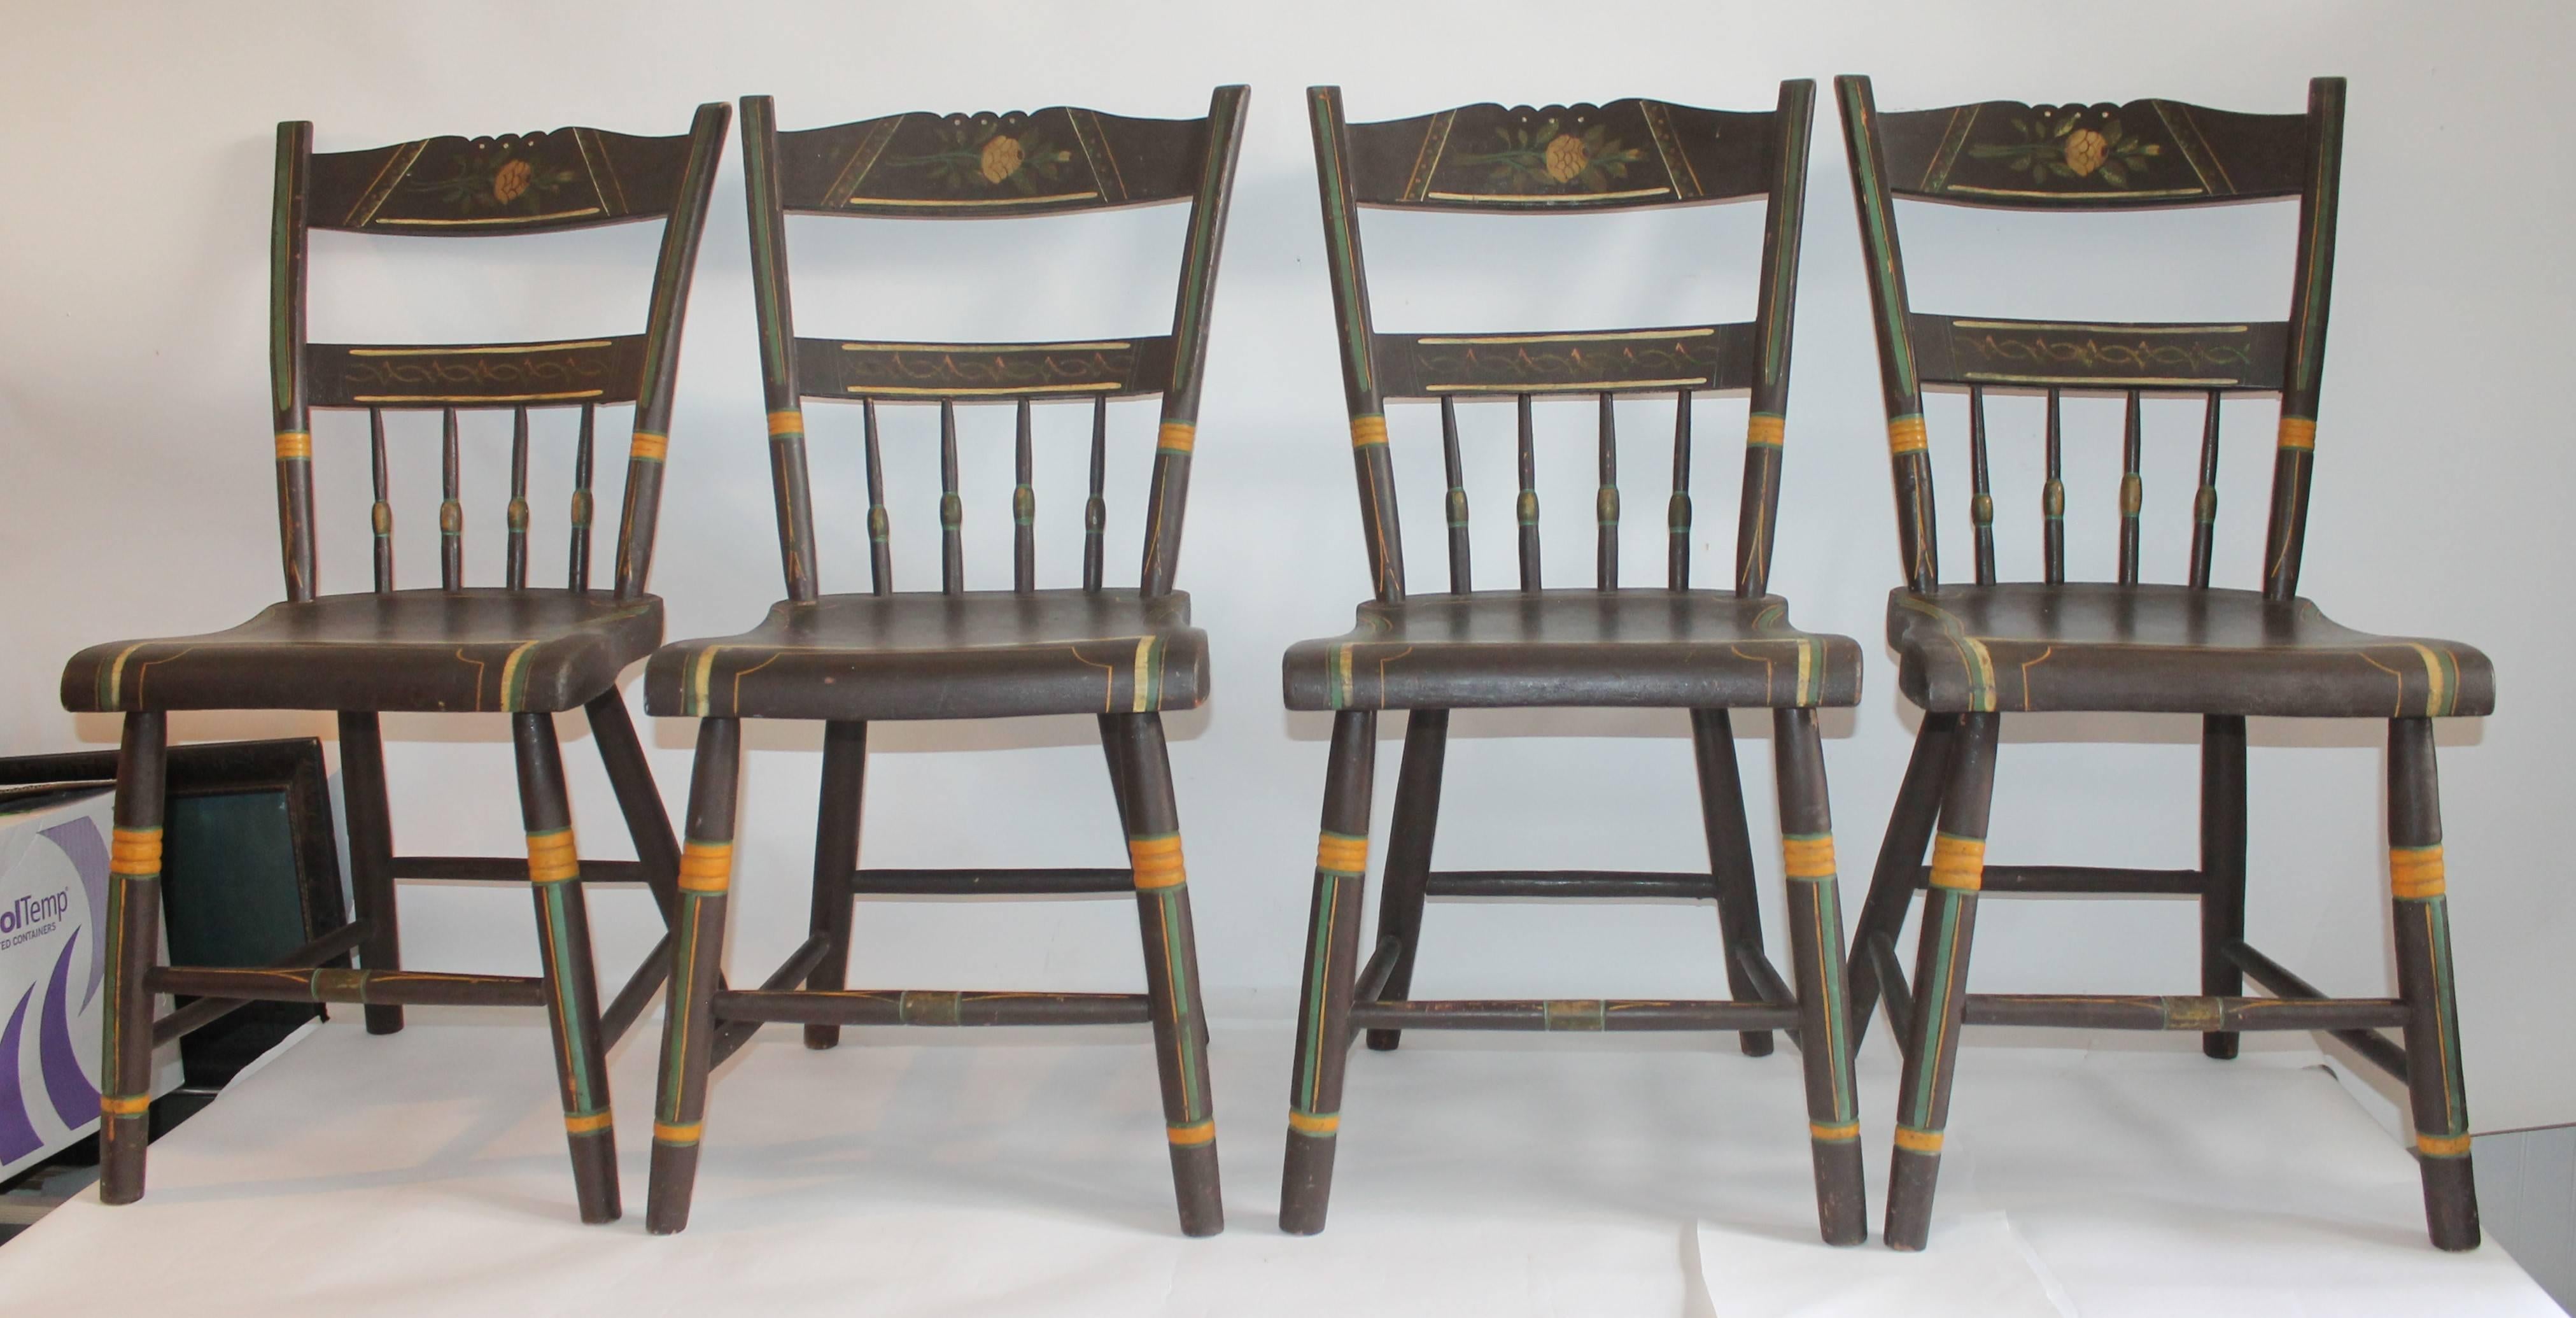 These 19th century original painted and decorated plank bottom chairs are in fine condition. These finely decorated chairs are signed on the bottom : PAINTED BY W.S. PIPER , SPRING RUN, PA. The chairs dated from the third quarter of the 19th century